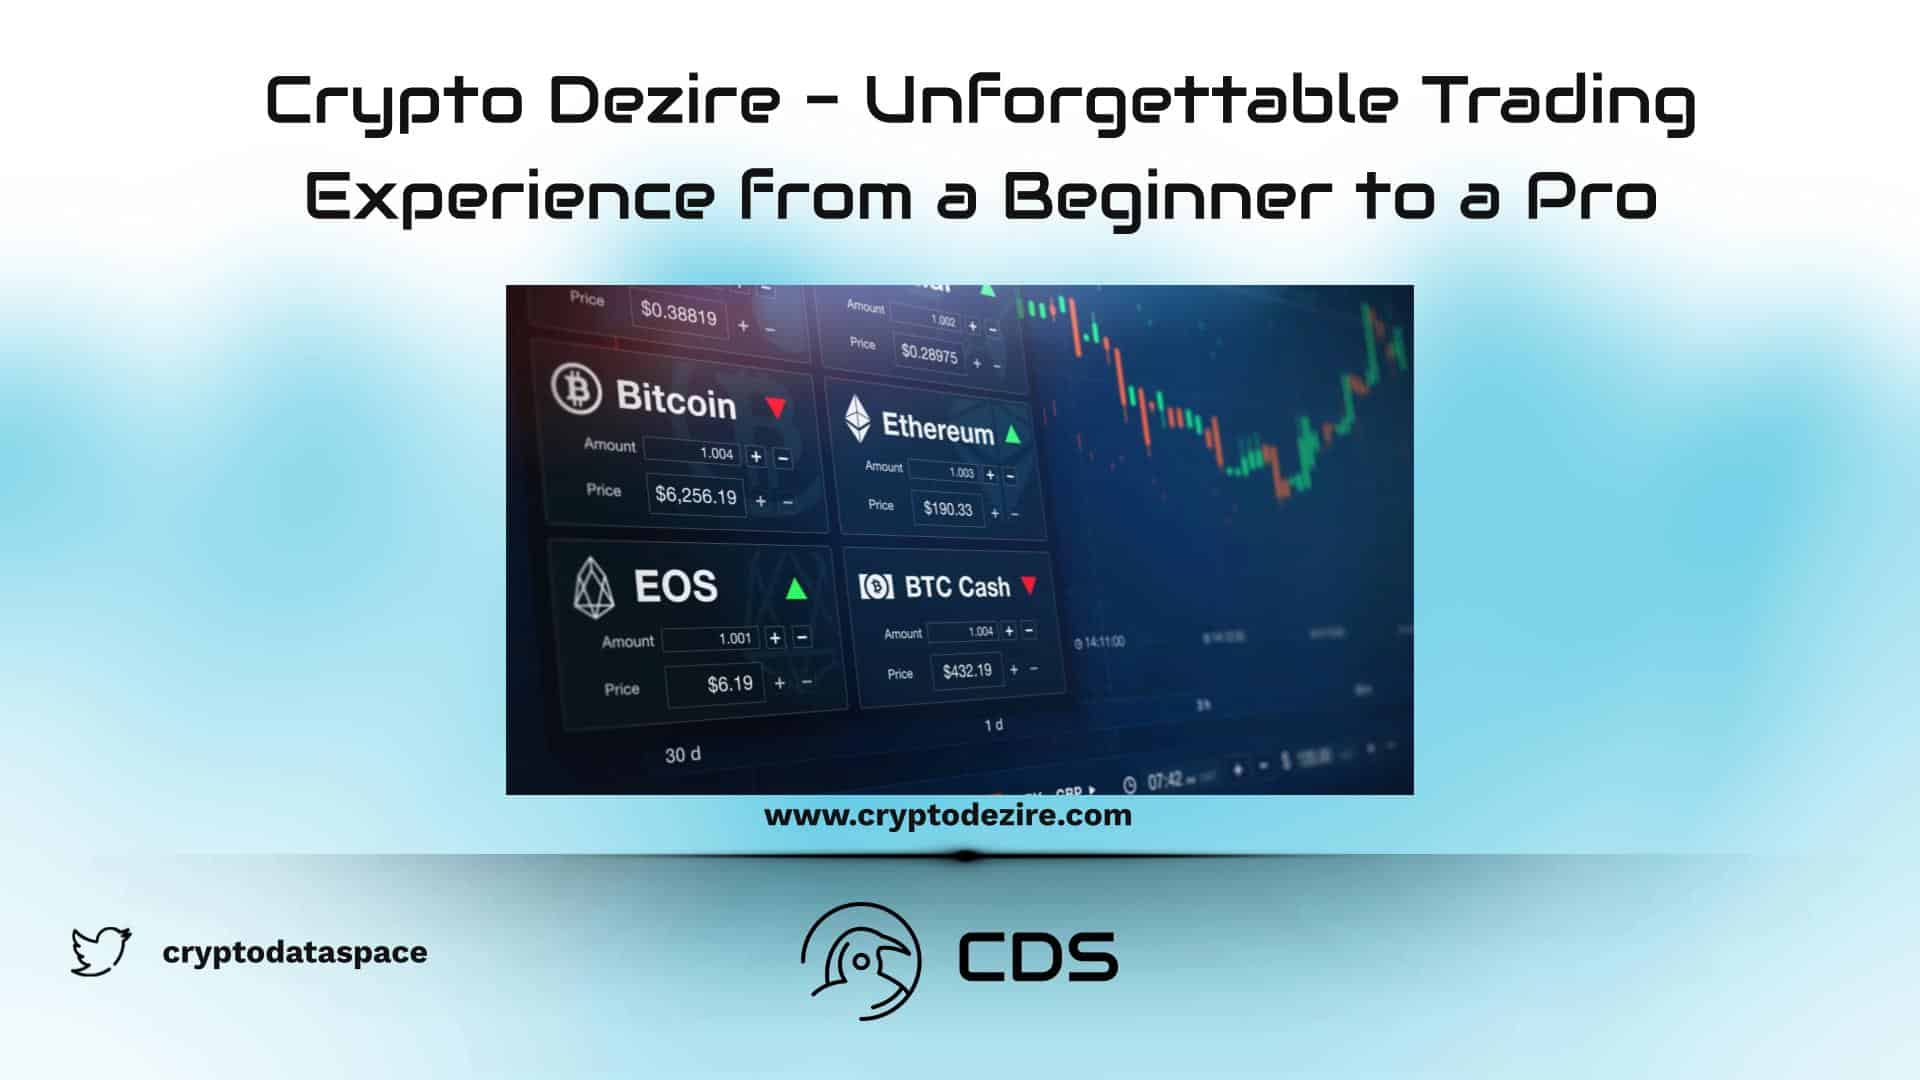 Crypto Dezire - Unforgettable Trading Experience from a Beginner to a Pro